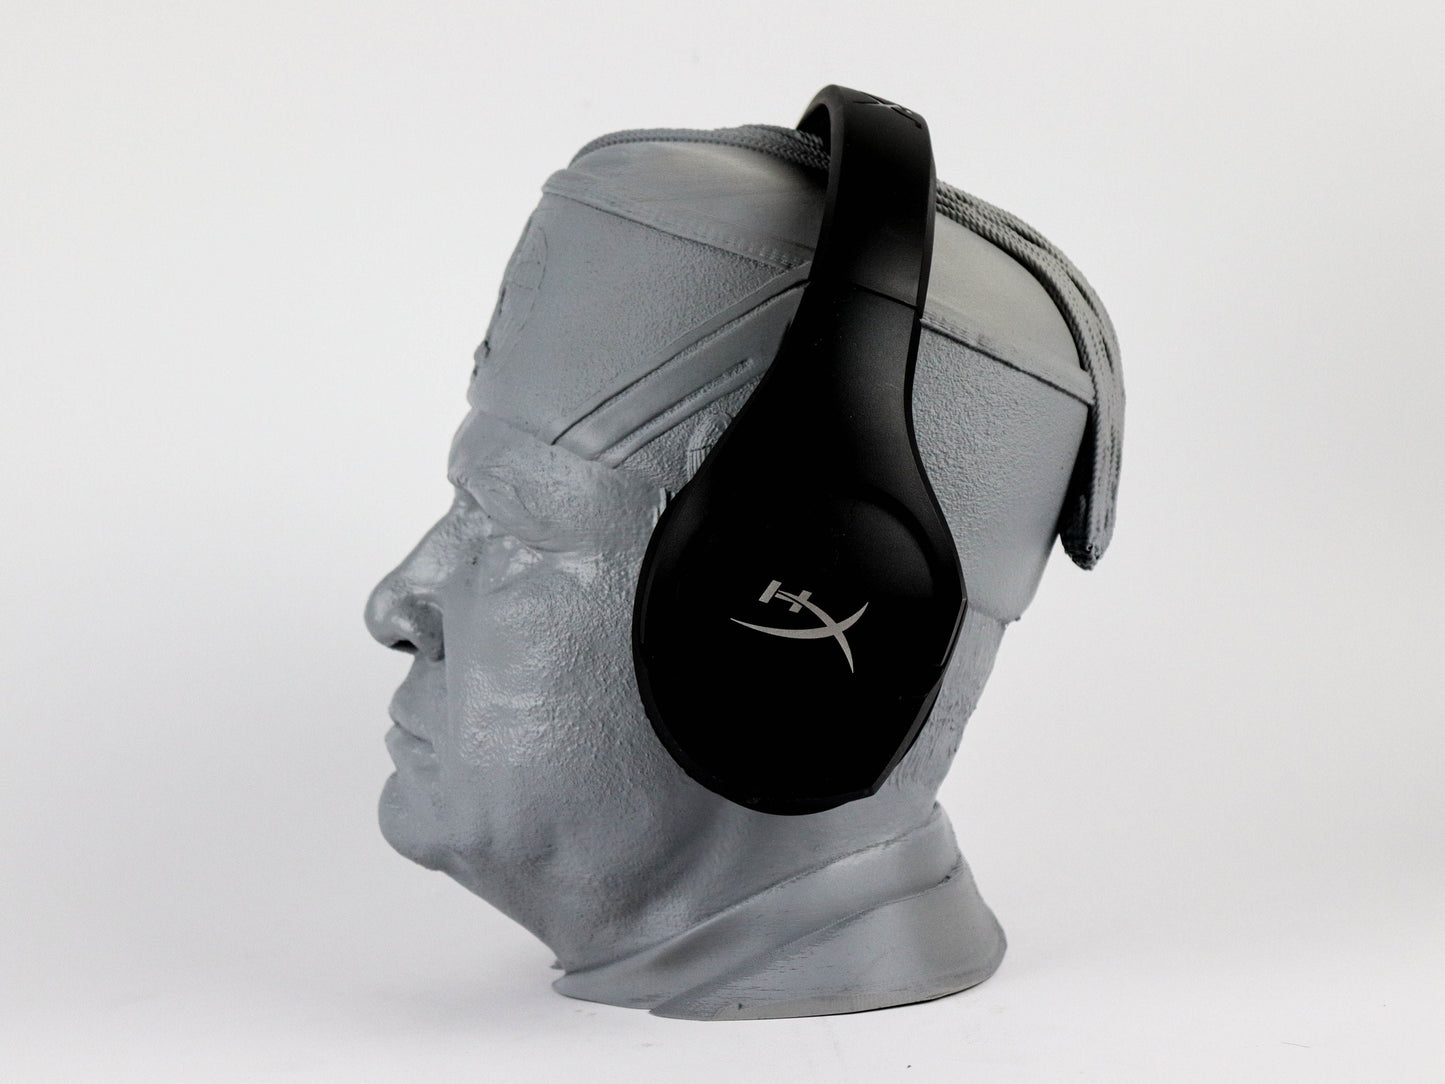 Benito Mussolini Bust, Il Duce Statue, Former Prime Minister of Italy Headphone Decor